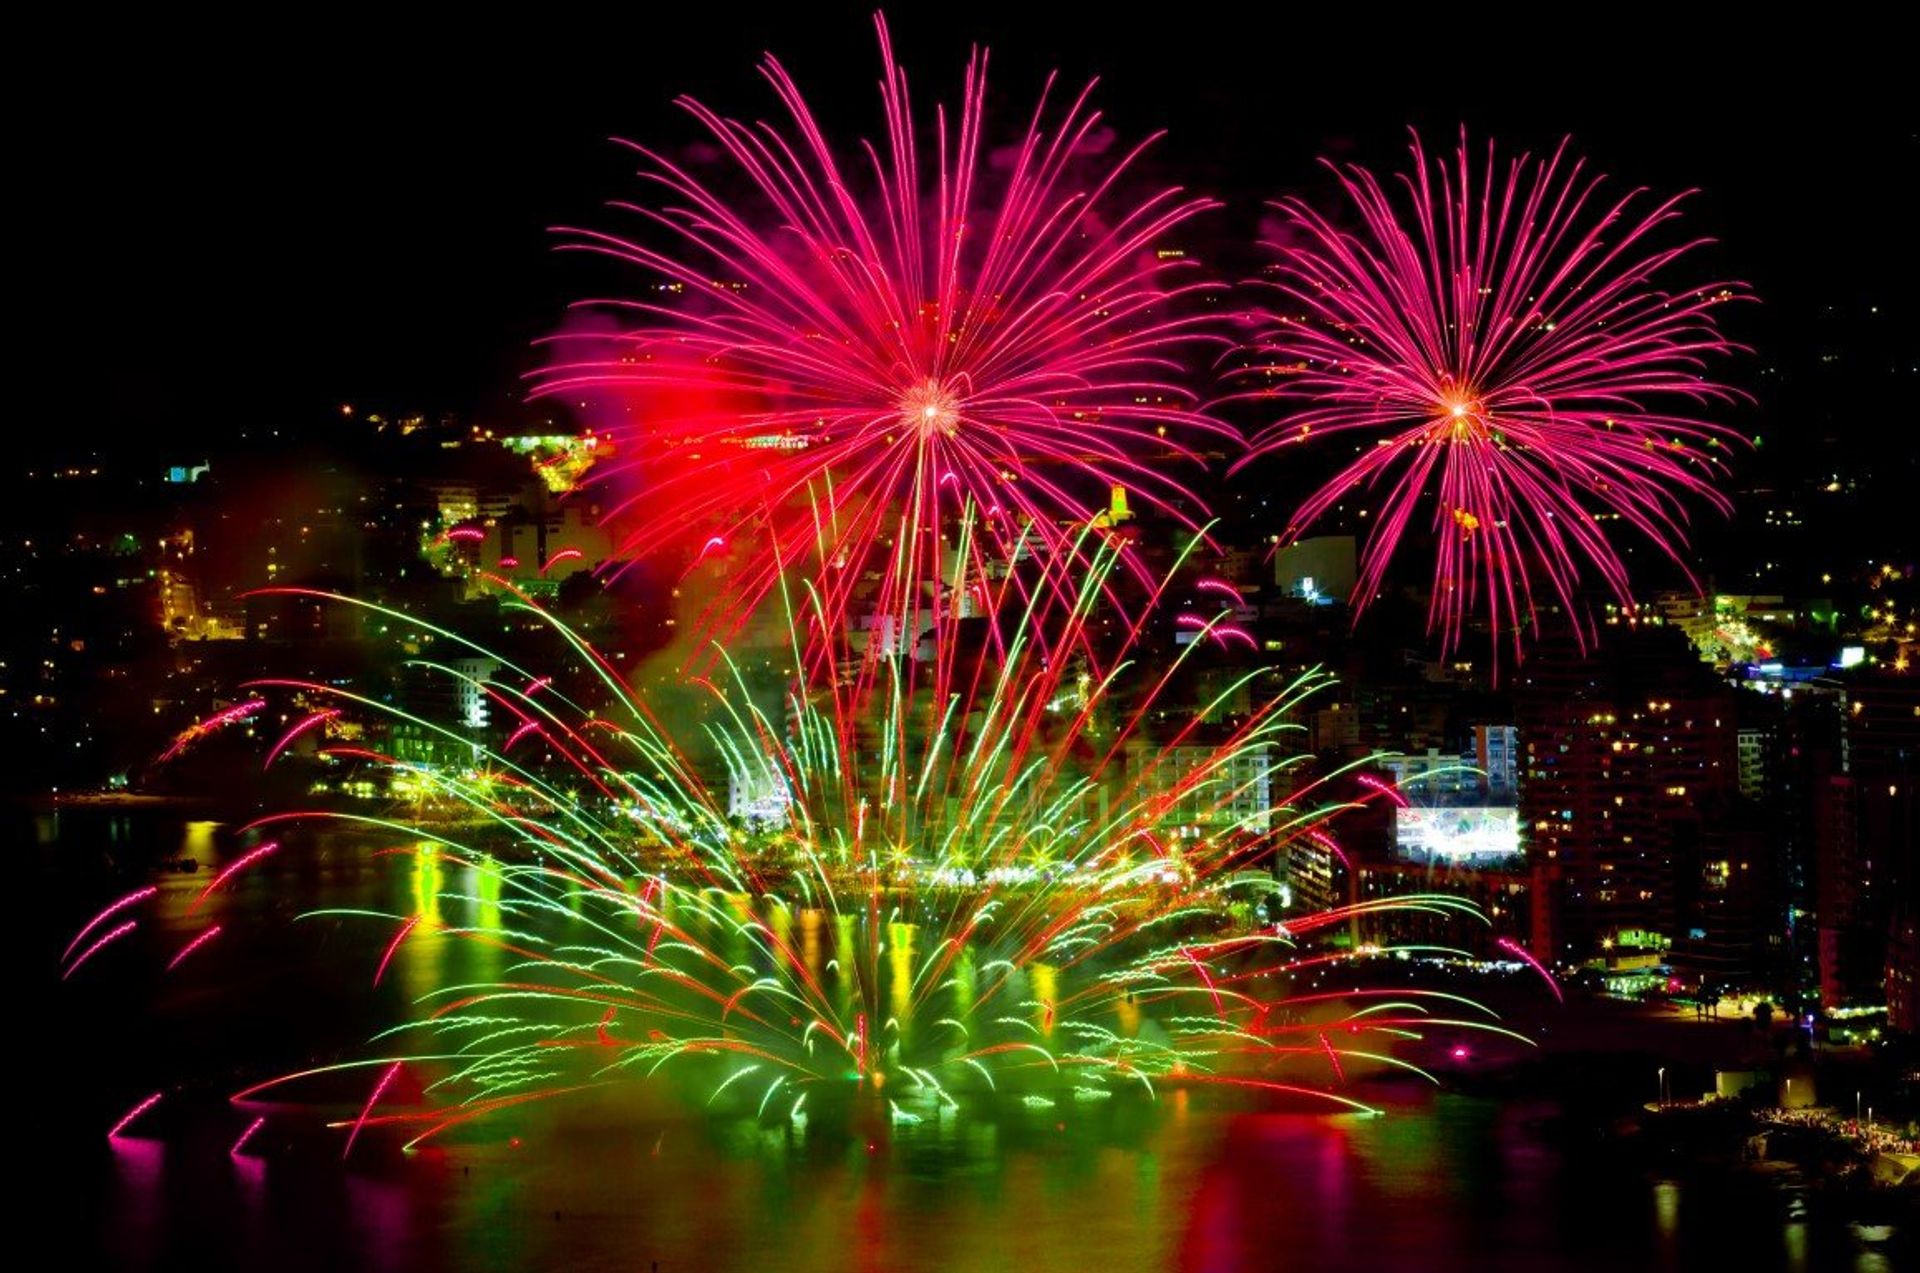 Celebrating in style! Calpe is known for its colourful fiestas and fireworks displays